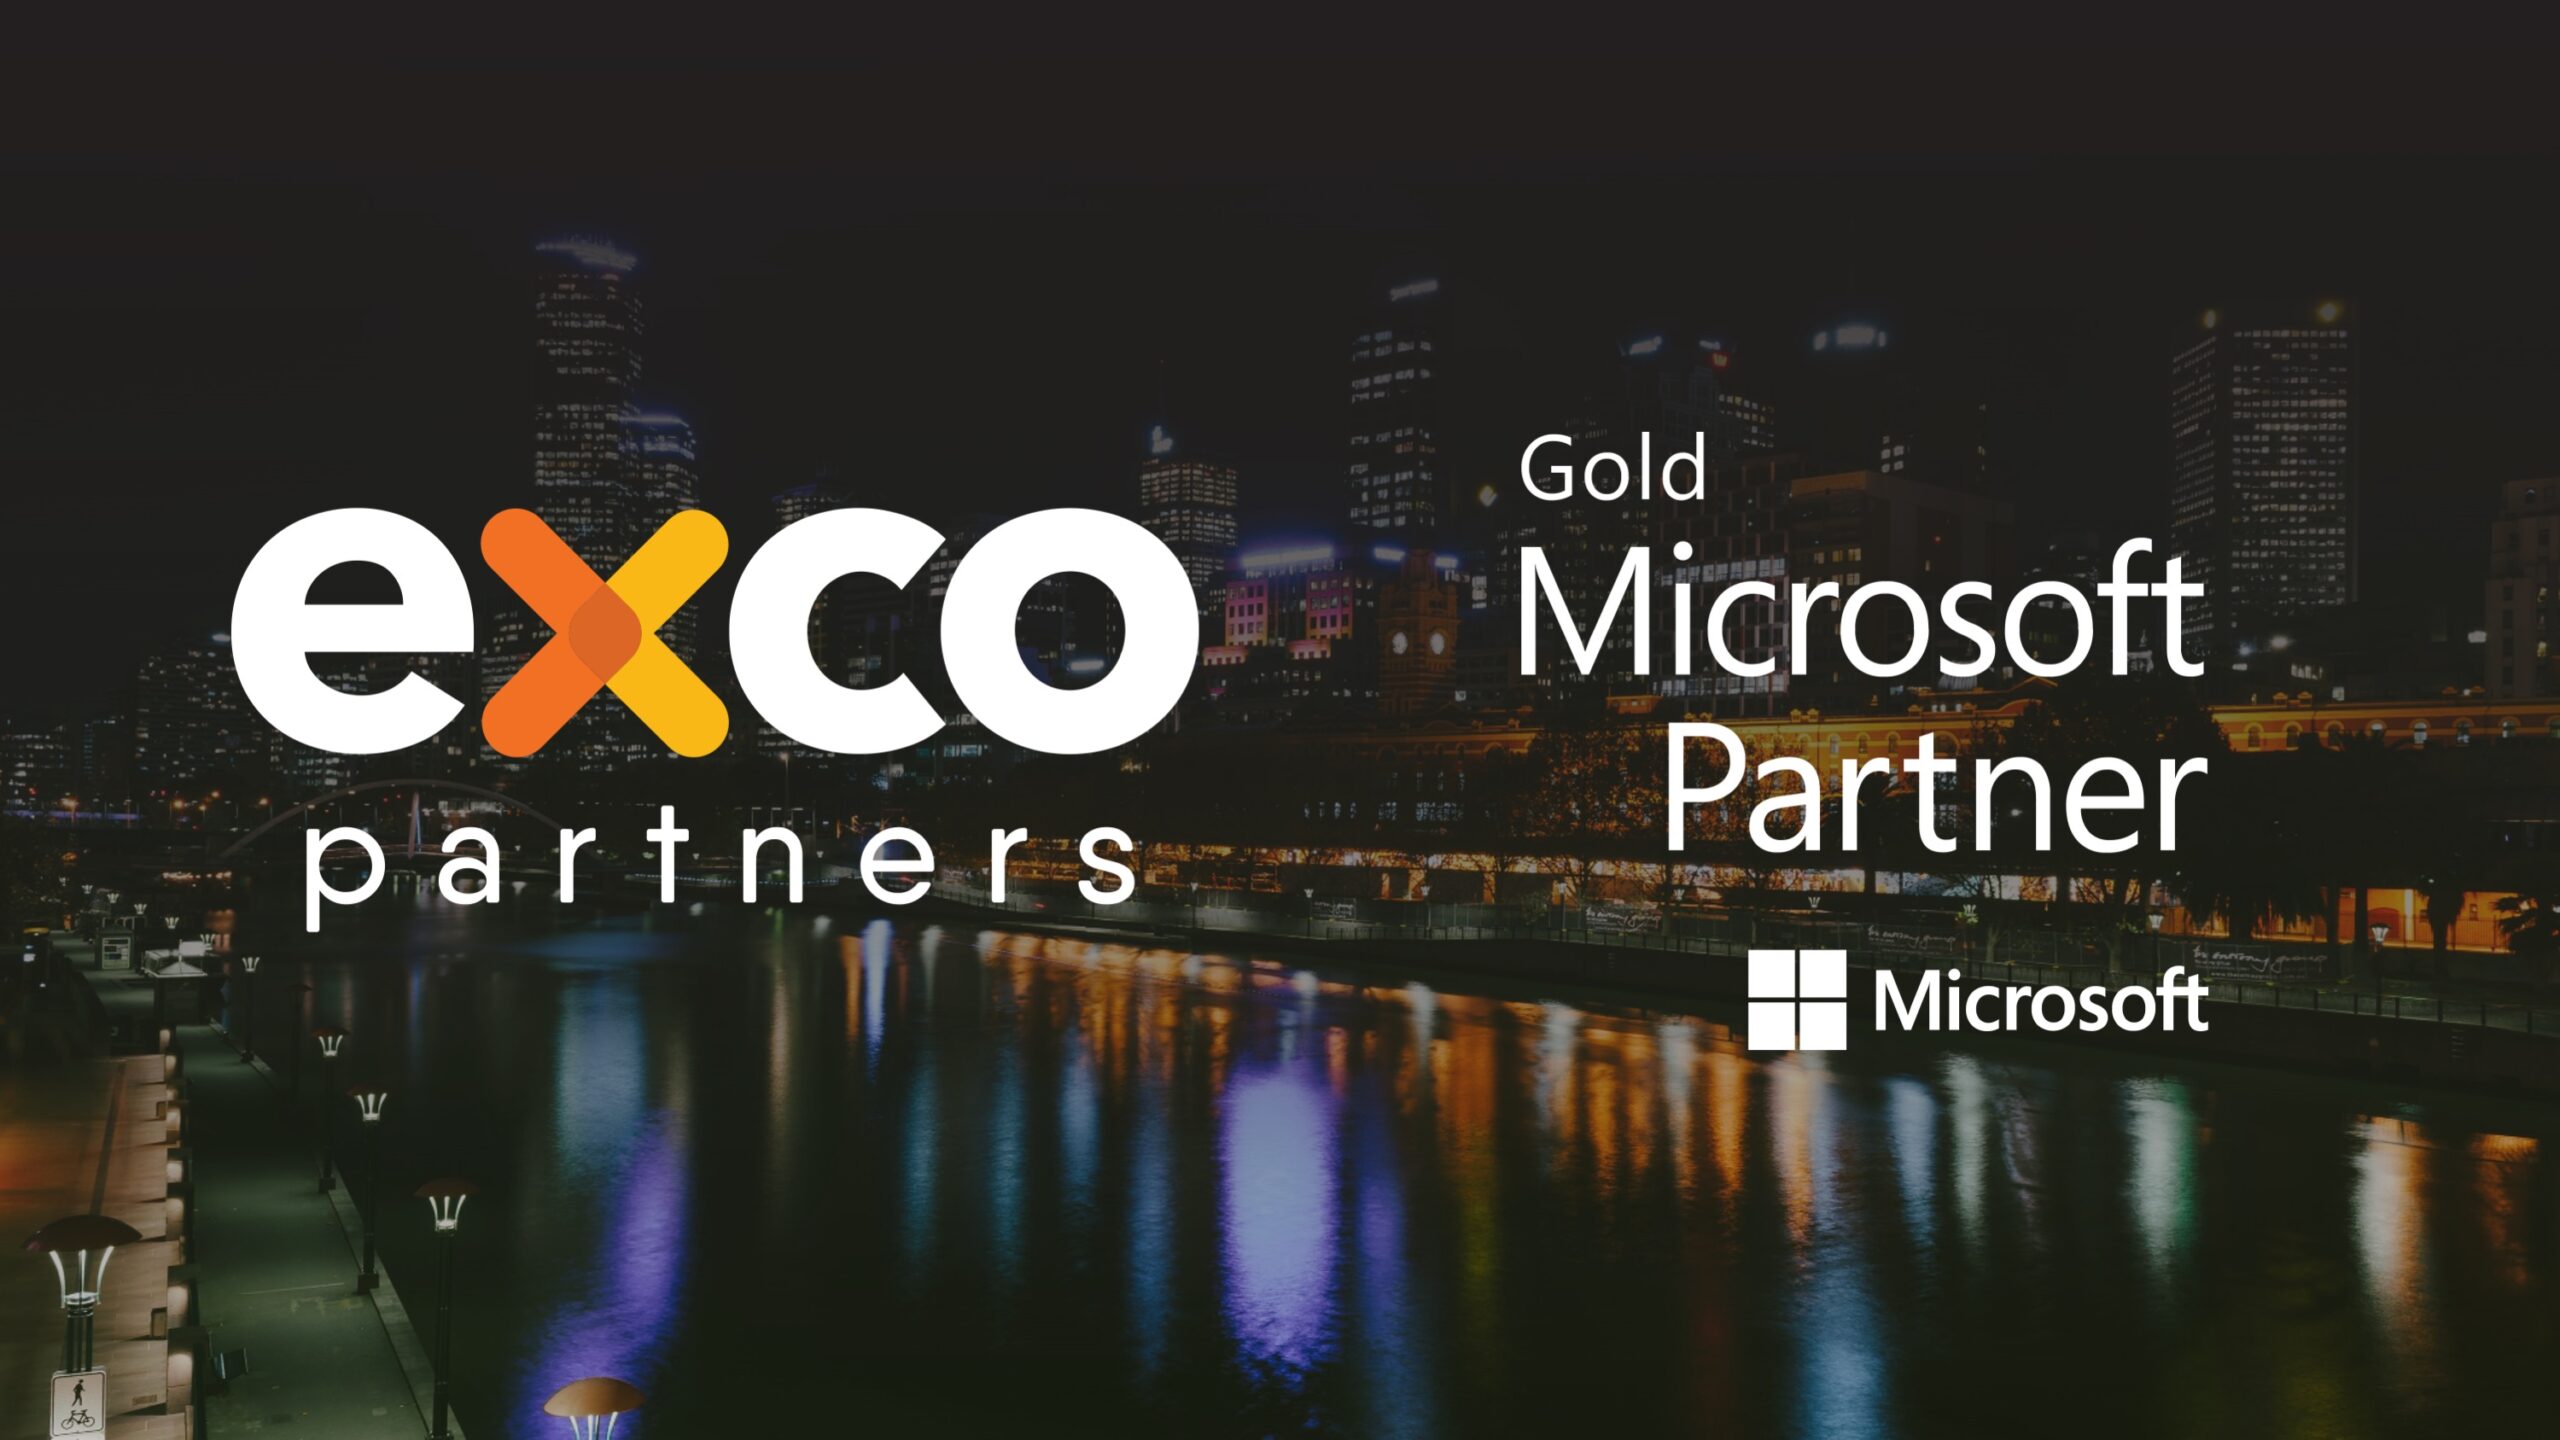 Feature image for Microsoft gold partner status